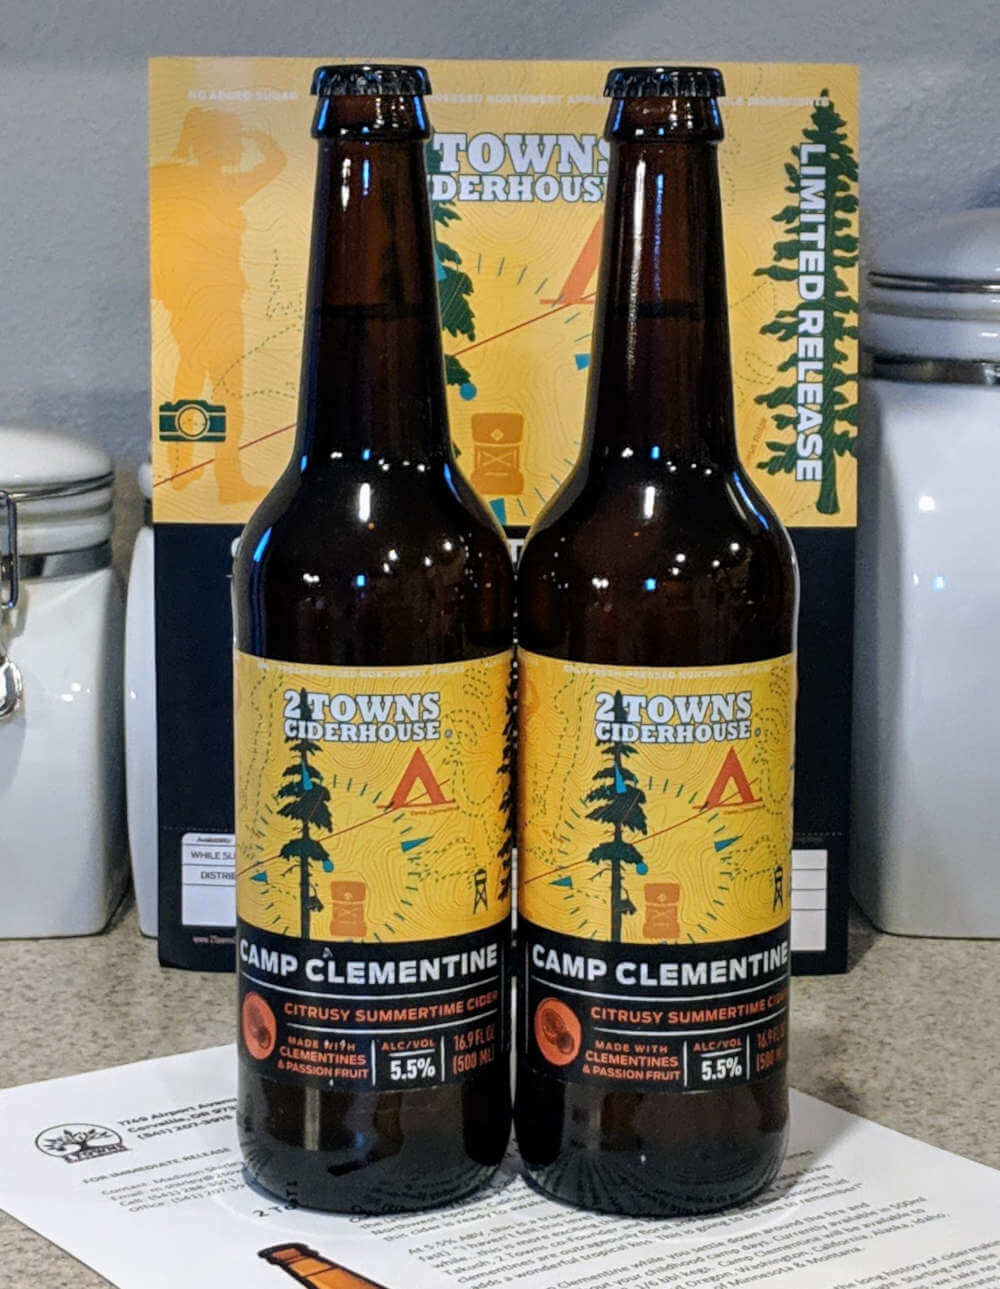 Received: 2 Towns Camp Clementine Cider